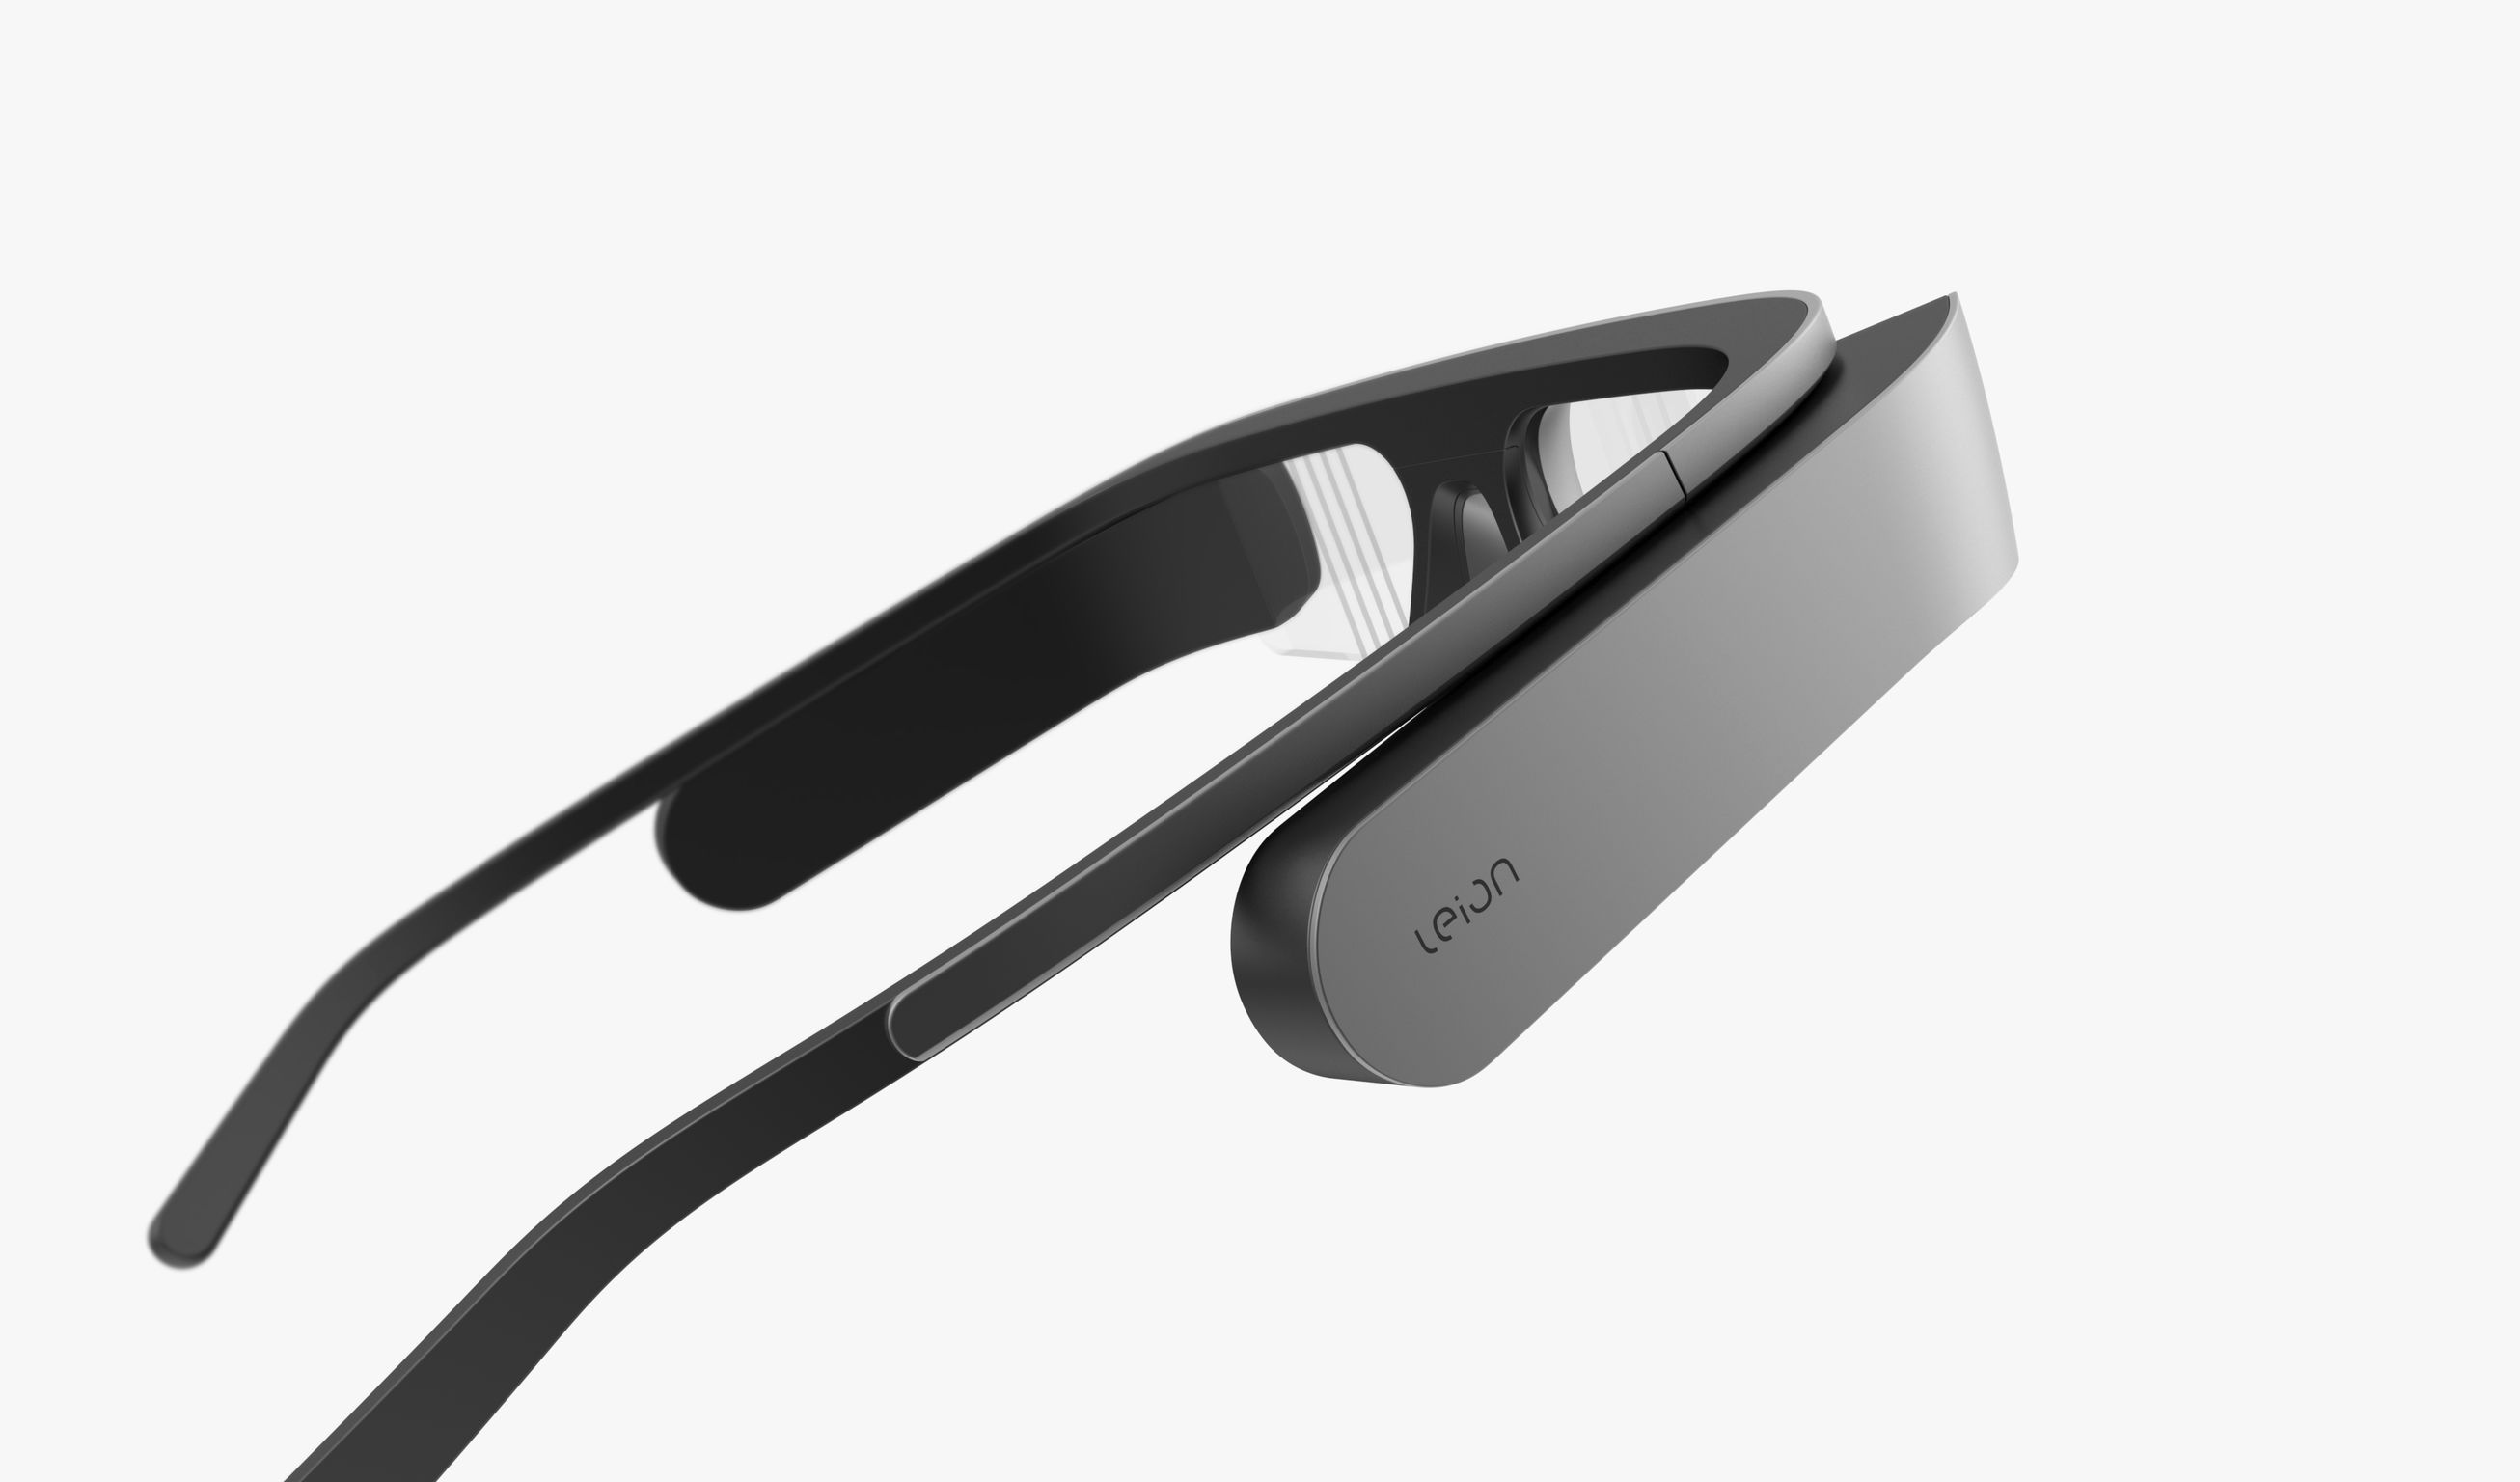 Leion Augmented Reality Smart Glasses